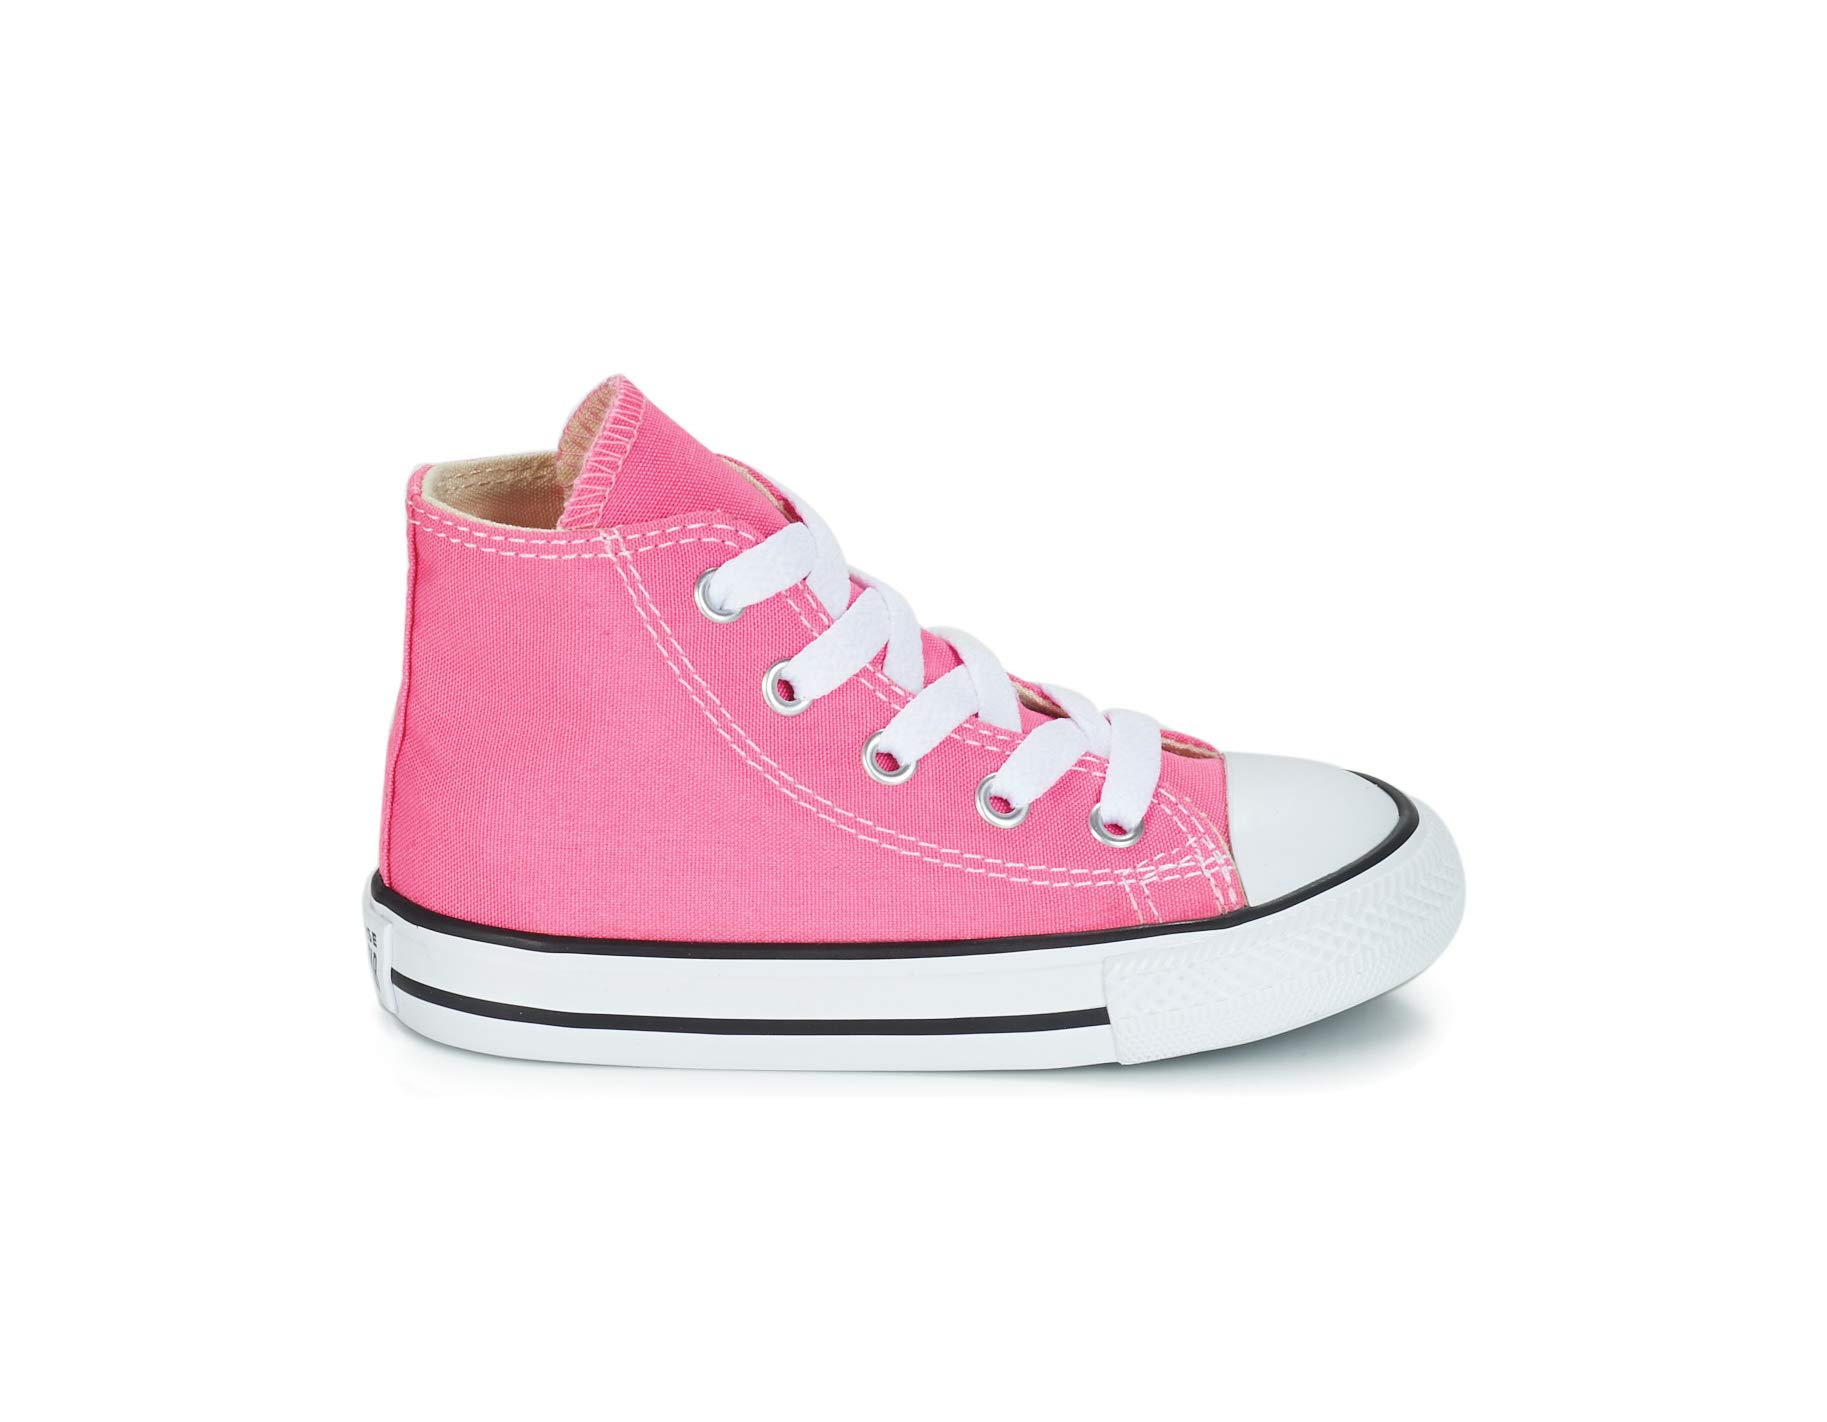 Converse Chuck Taylor All Star High Top Infant Shoes Pink 7j234